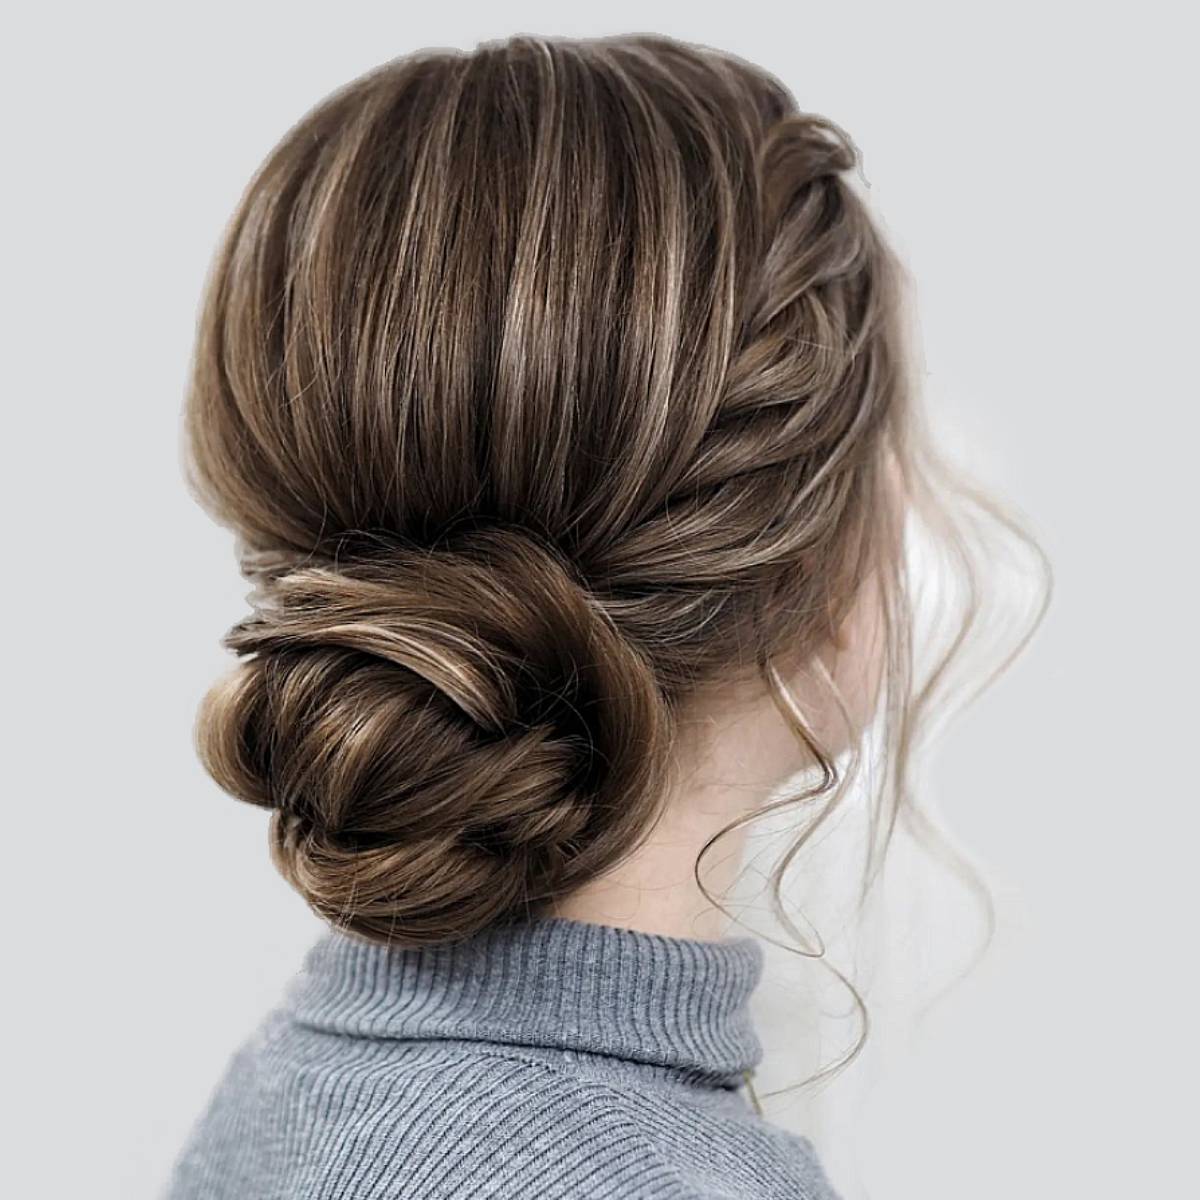 A messy bun with 10 inches of hair pieces and an ultra long, high bun with  extended wavy hair wrapped in ponytails, wigs, and ribbons. A girl with  curly hair - Cool